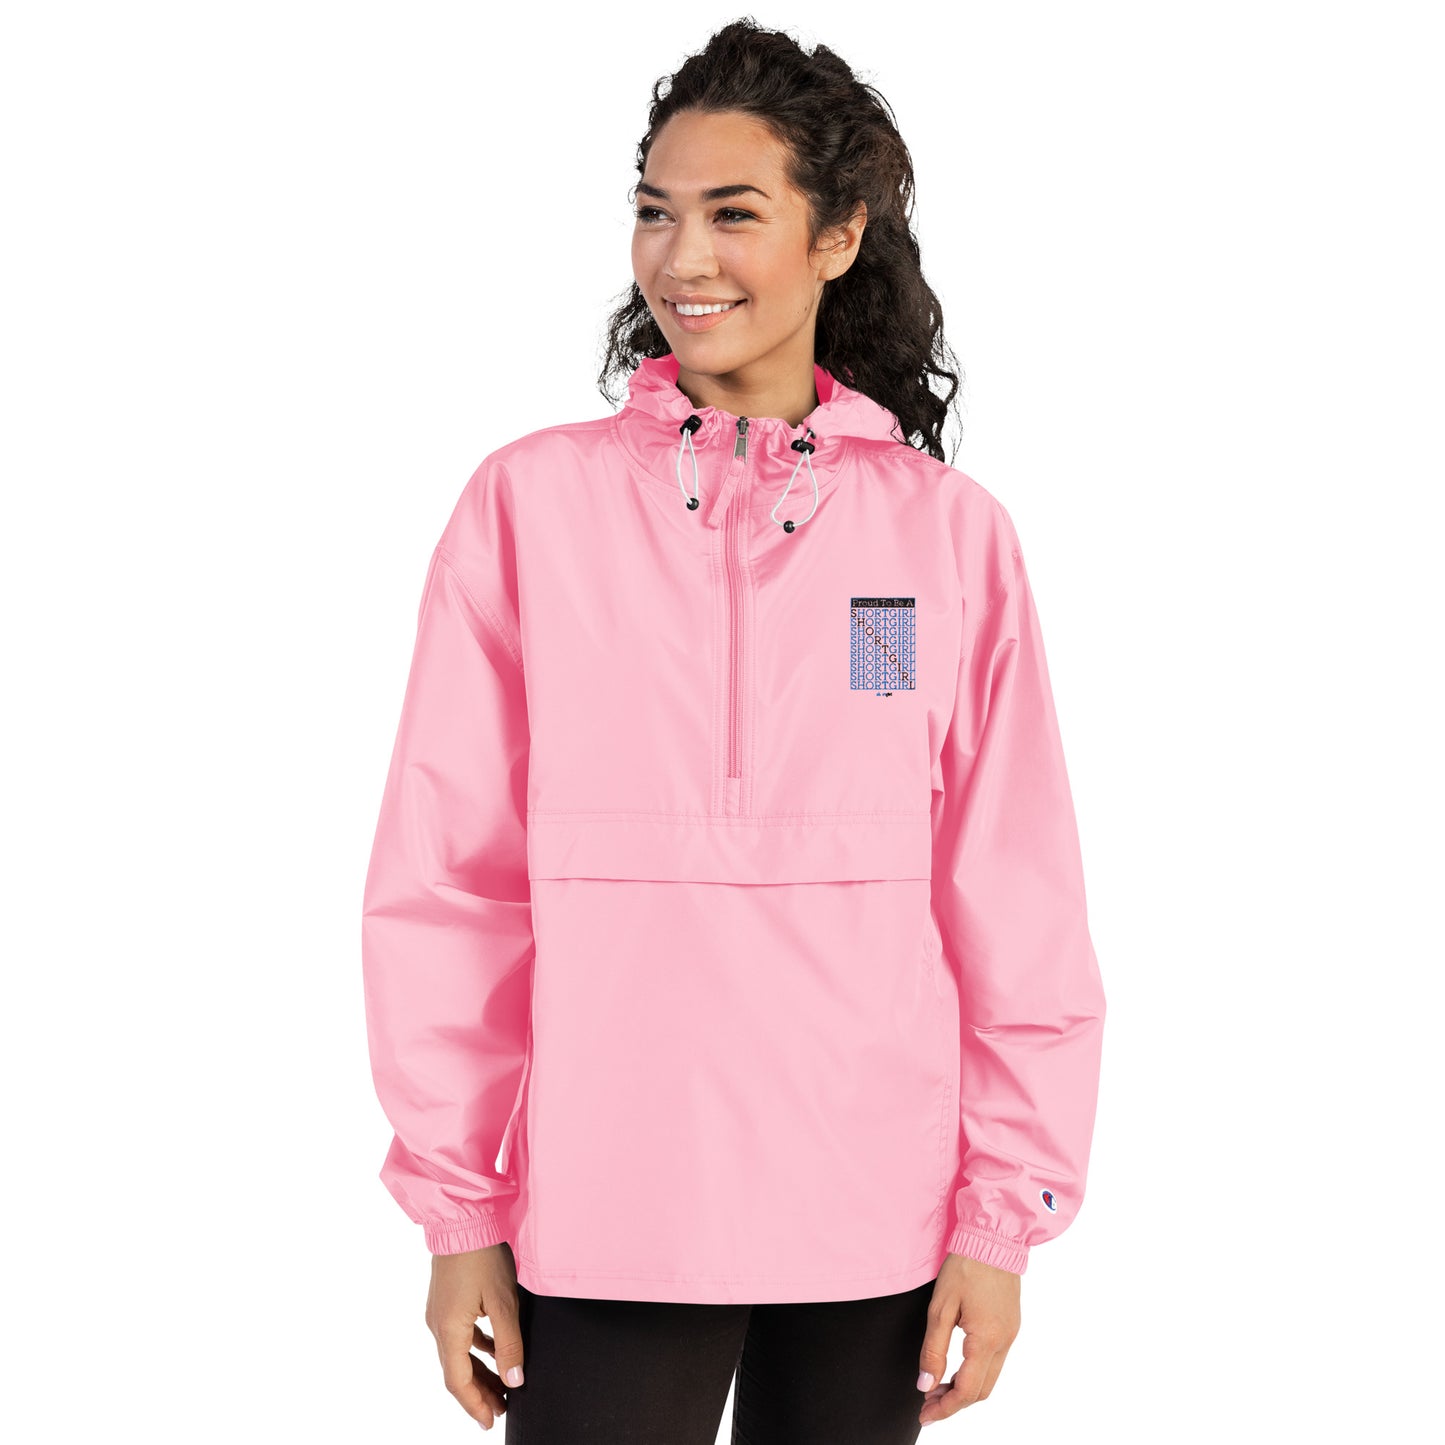 Embroidered Champion Packable Jacket - Proud to be a shortgirl